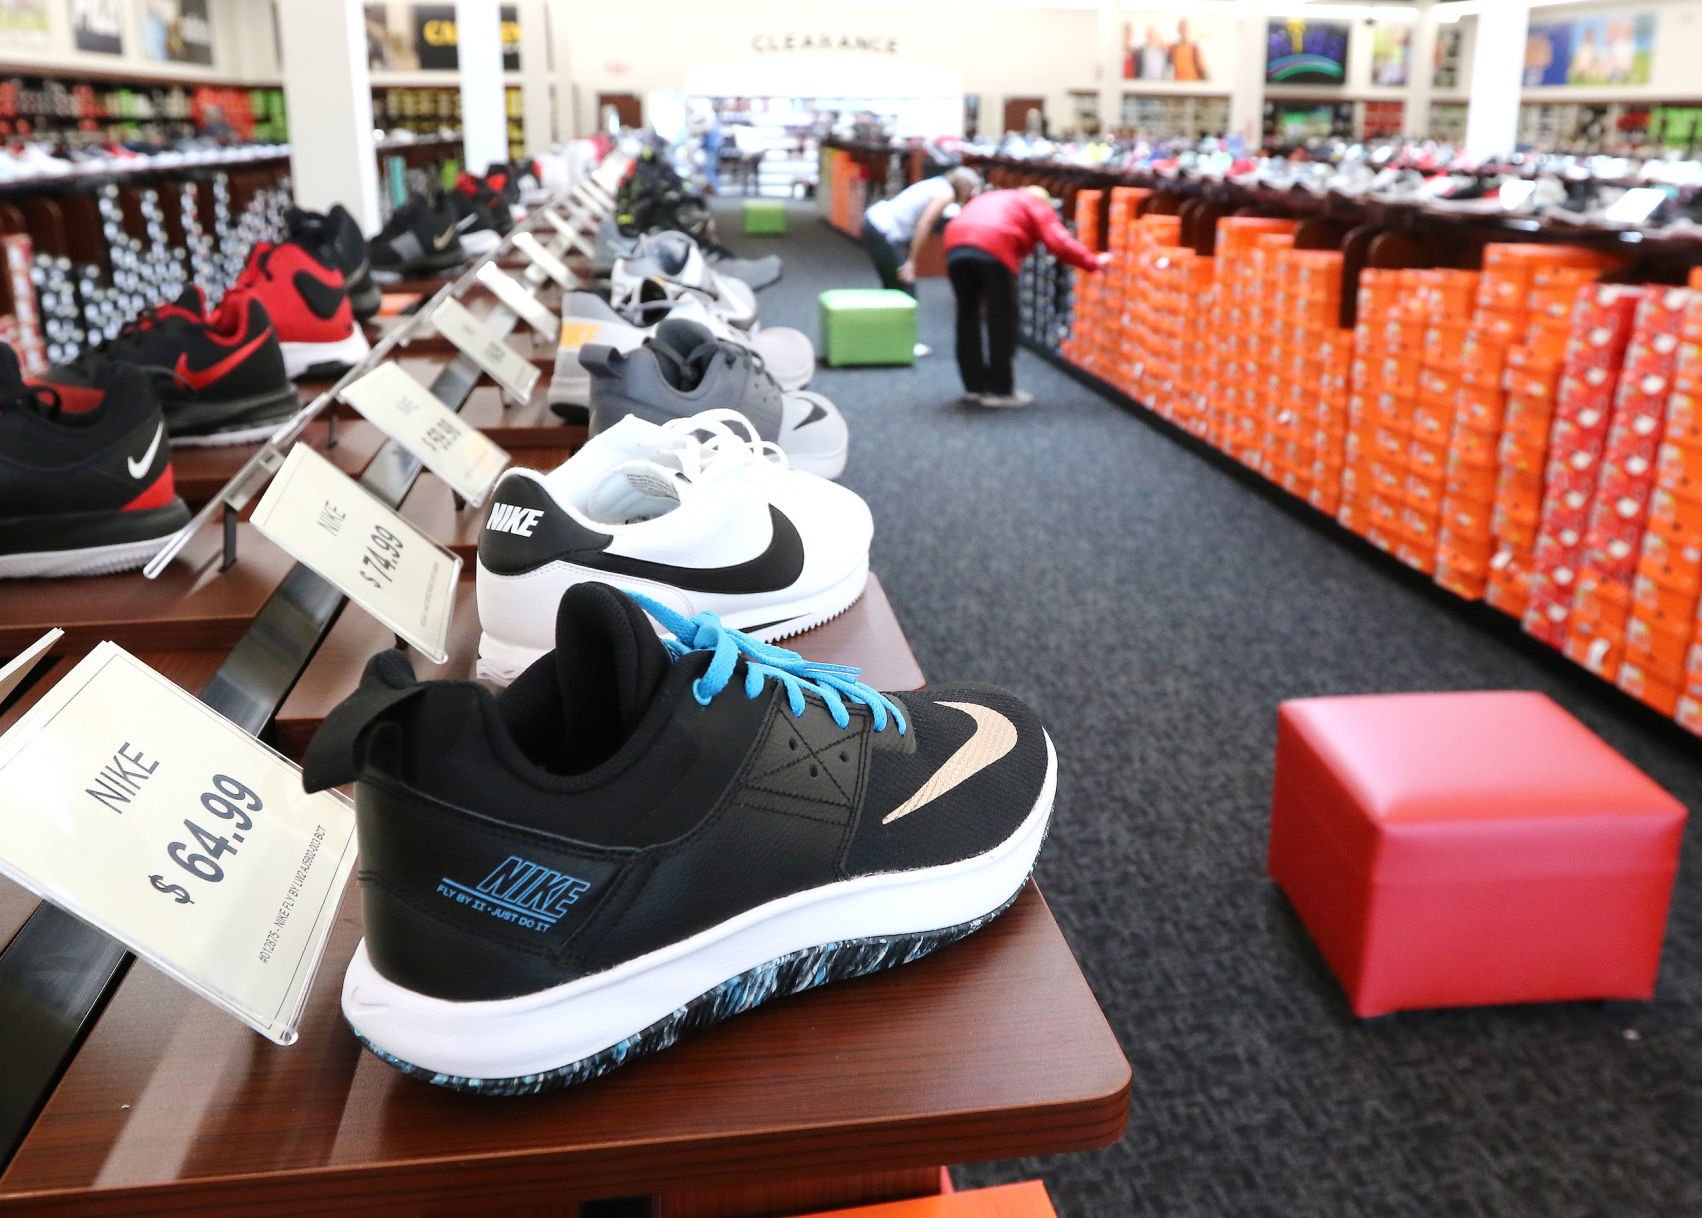 New shoe store stays busy | Local Biz 